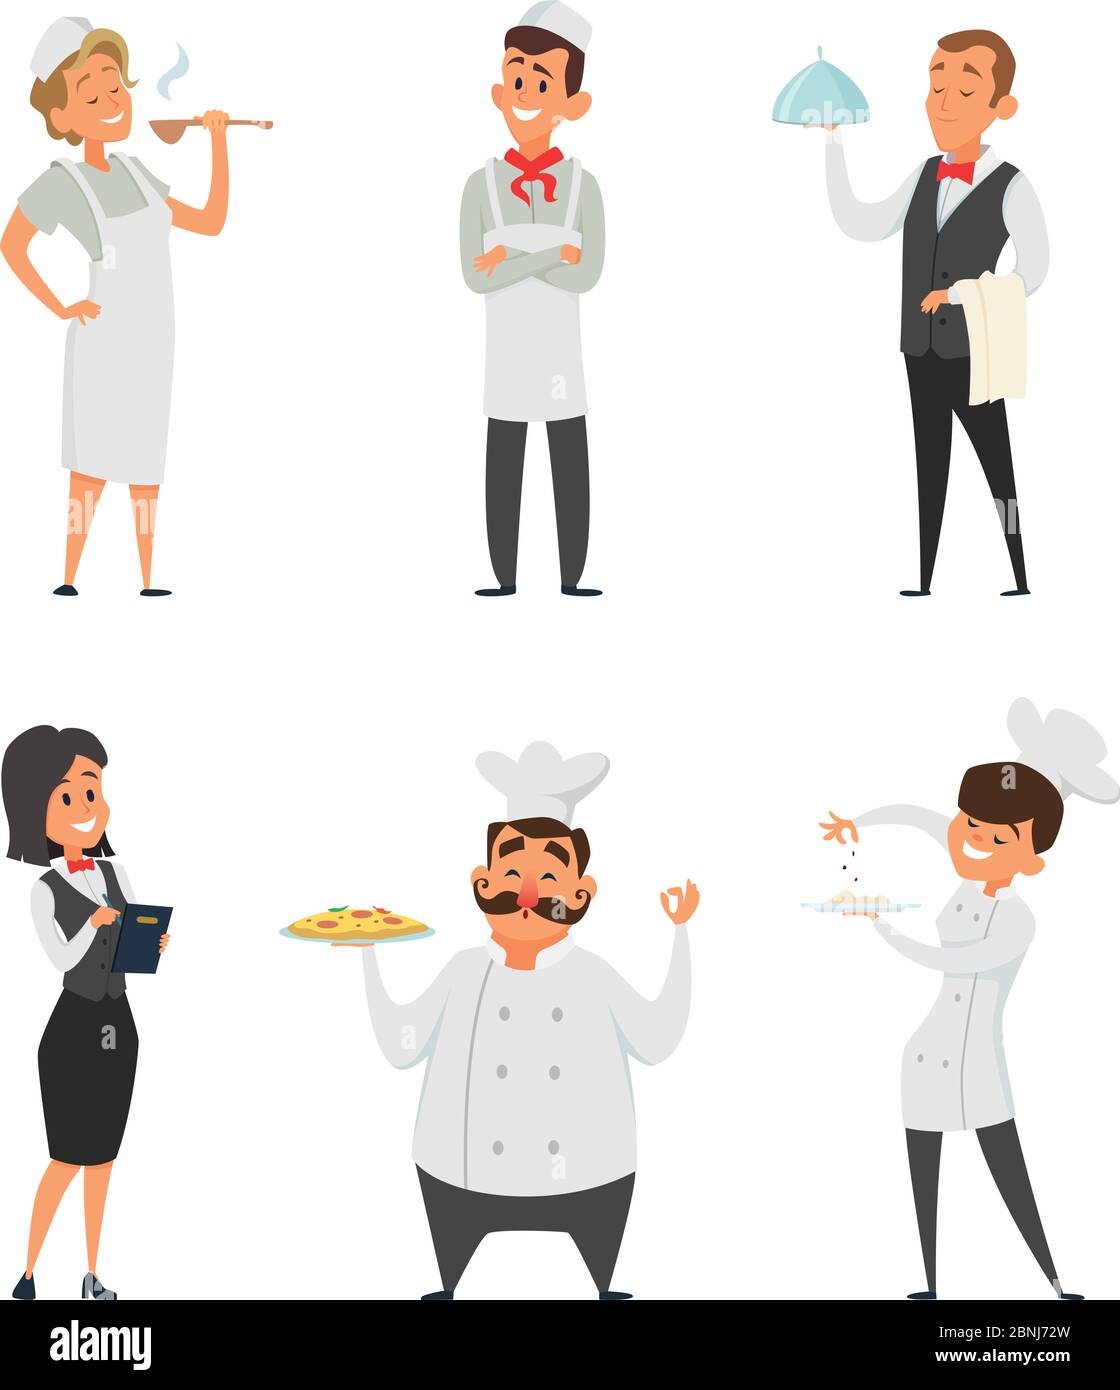 Professional staff of the restaurant. Cook, waiter and other cartoon characters Stock Vector